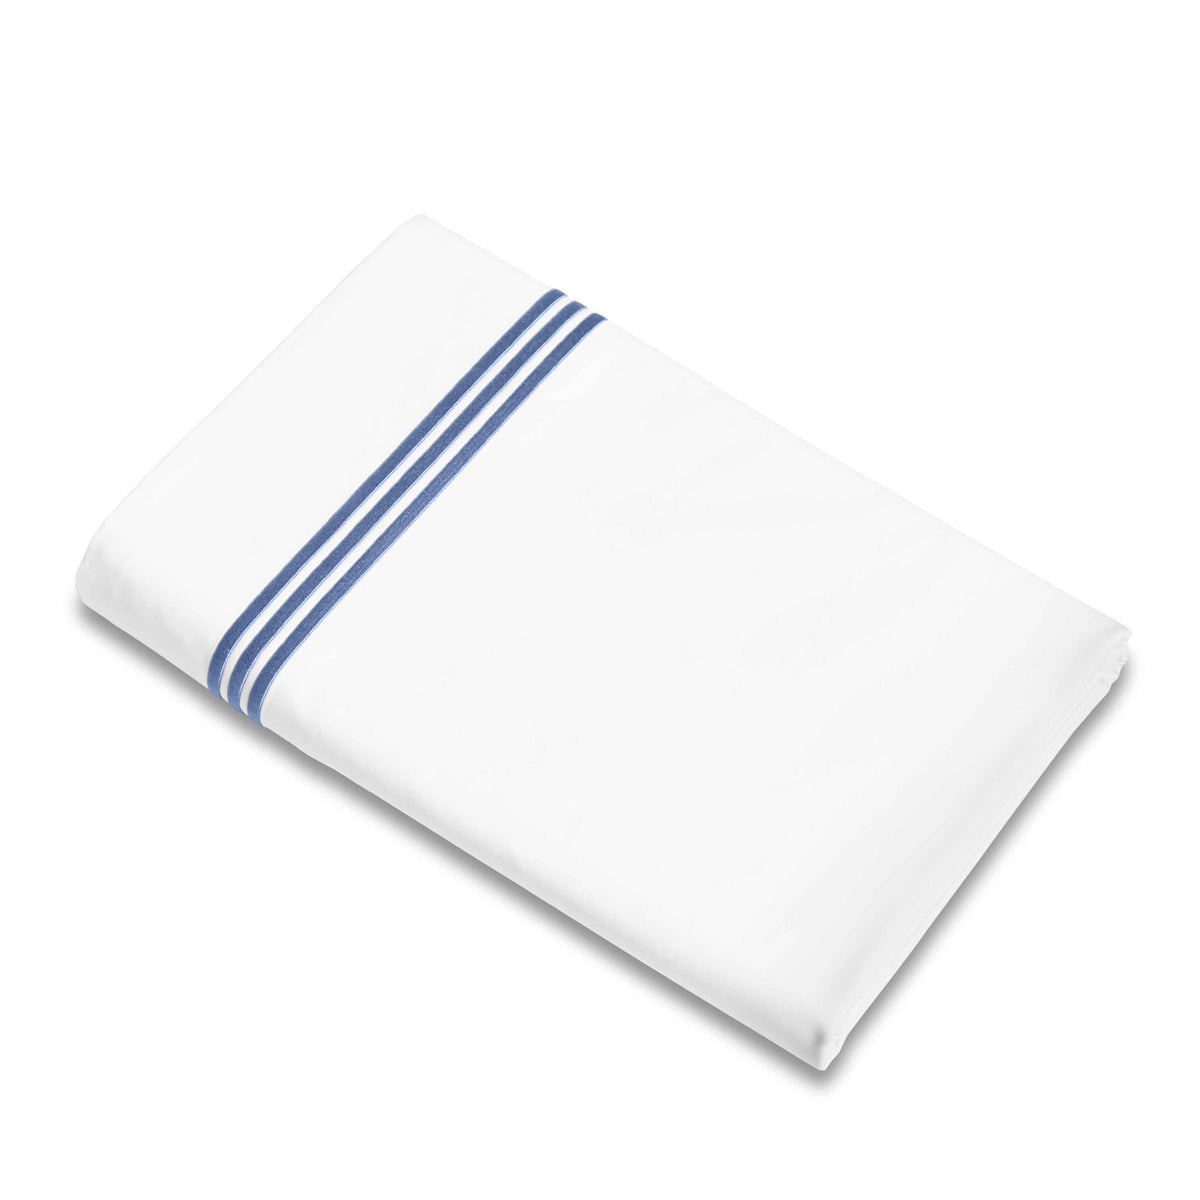 Flat Sheet of Signoria Platinum Percale Bedding in White/Airforce Blue Color